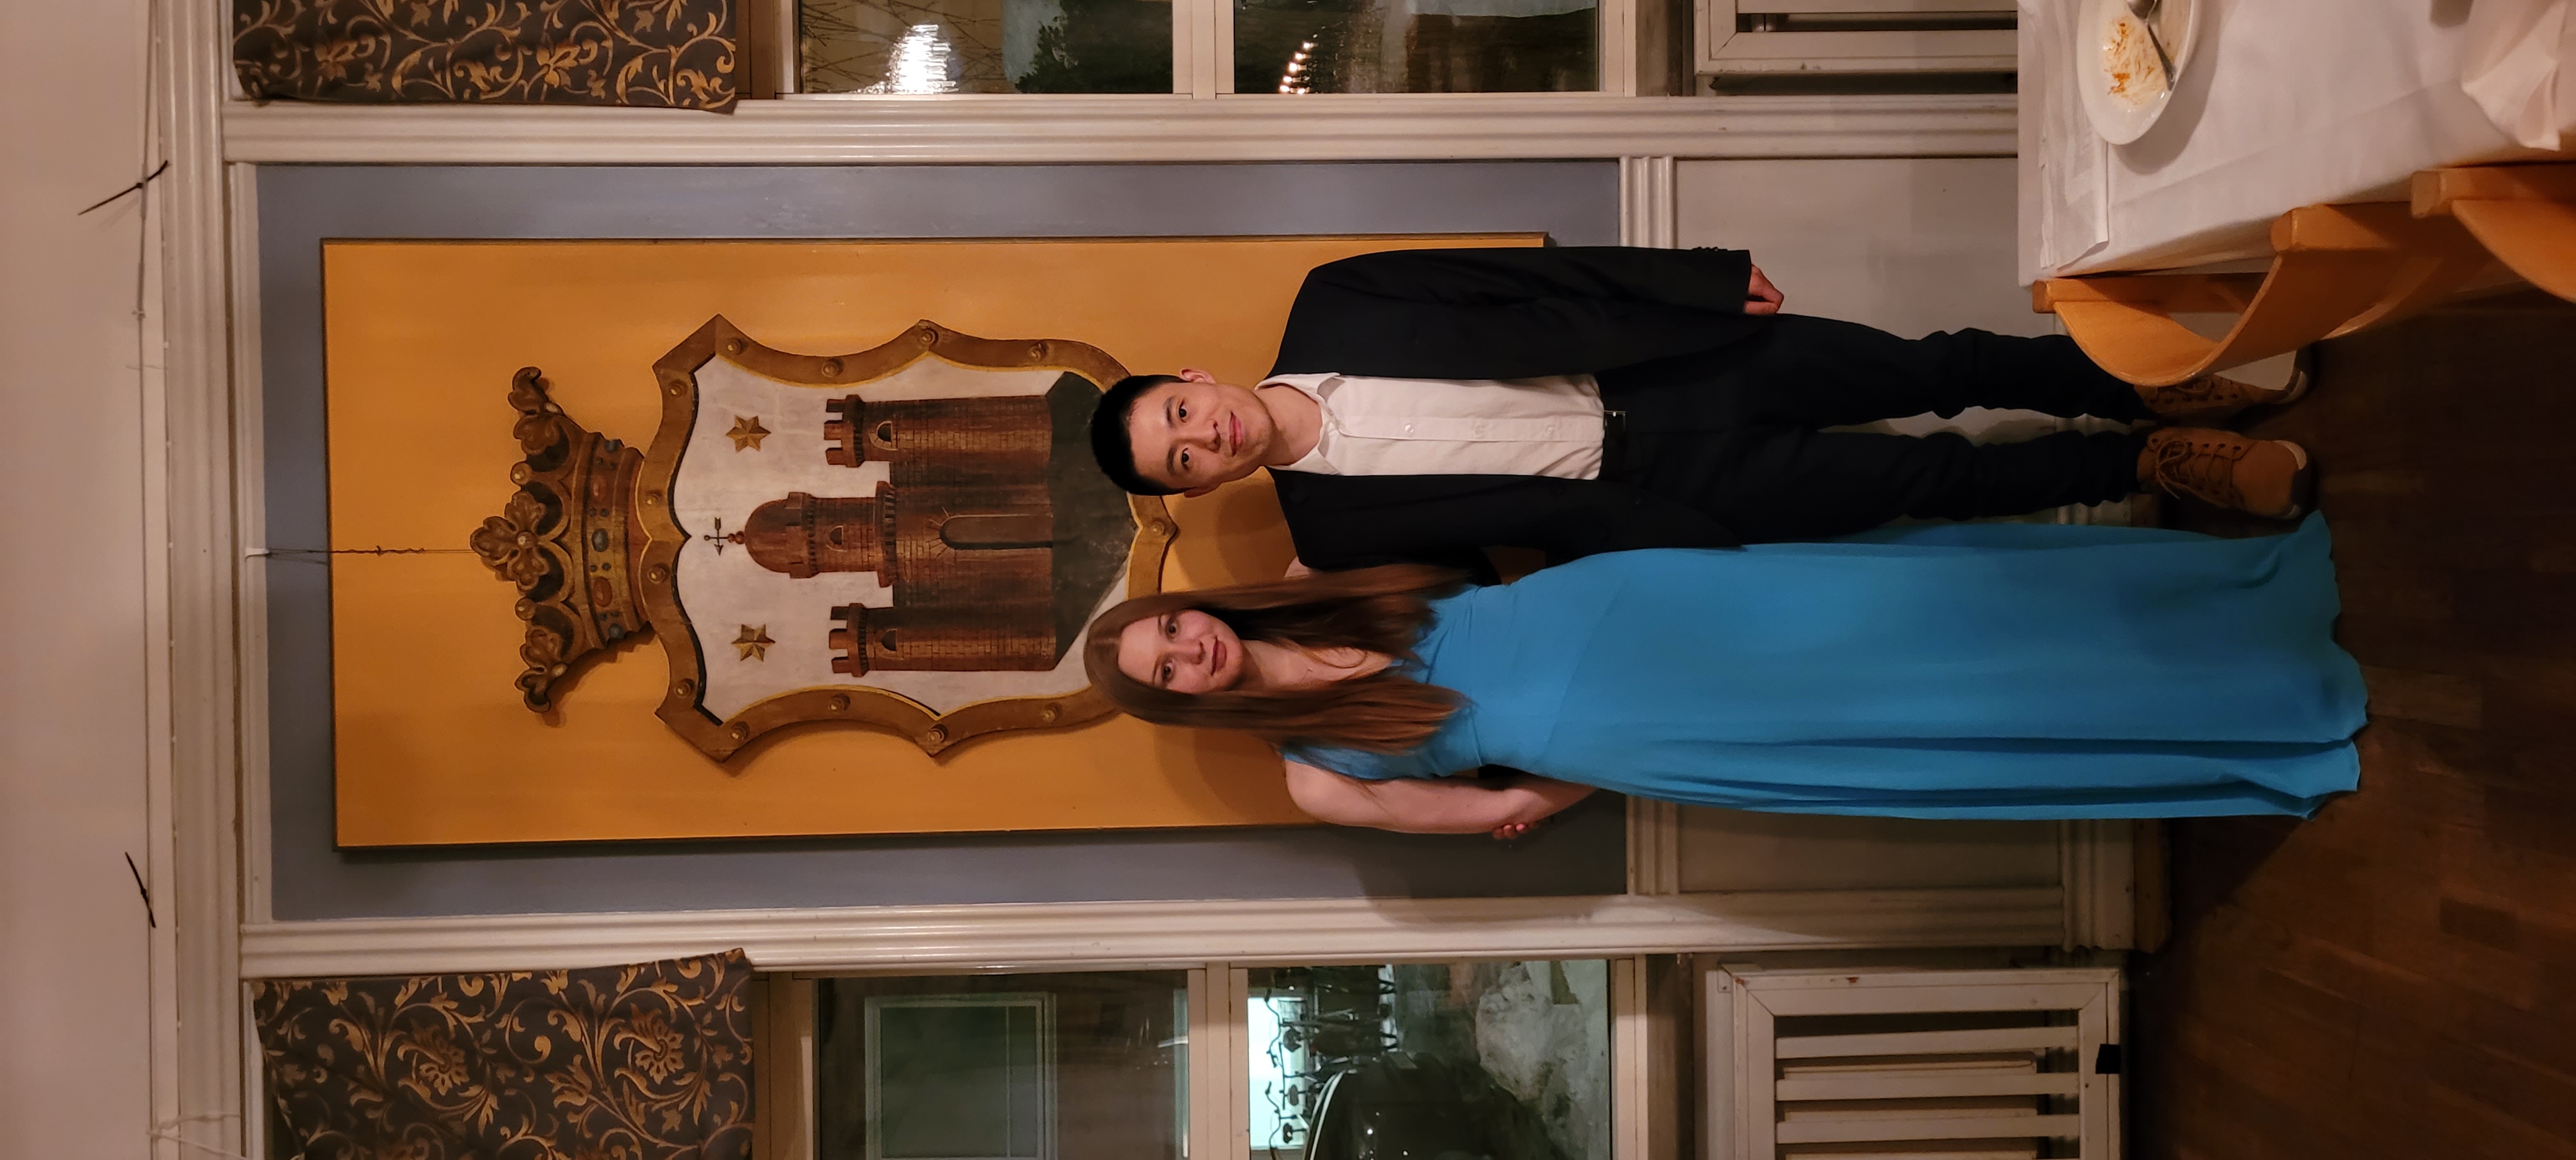 At a formal dinner night (Swedish gasque) with my girlfriend hosted by Kalmar student nation